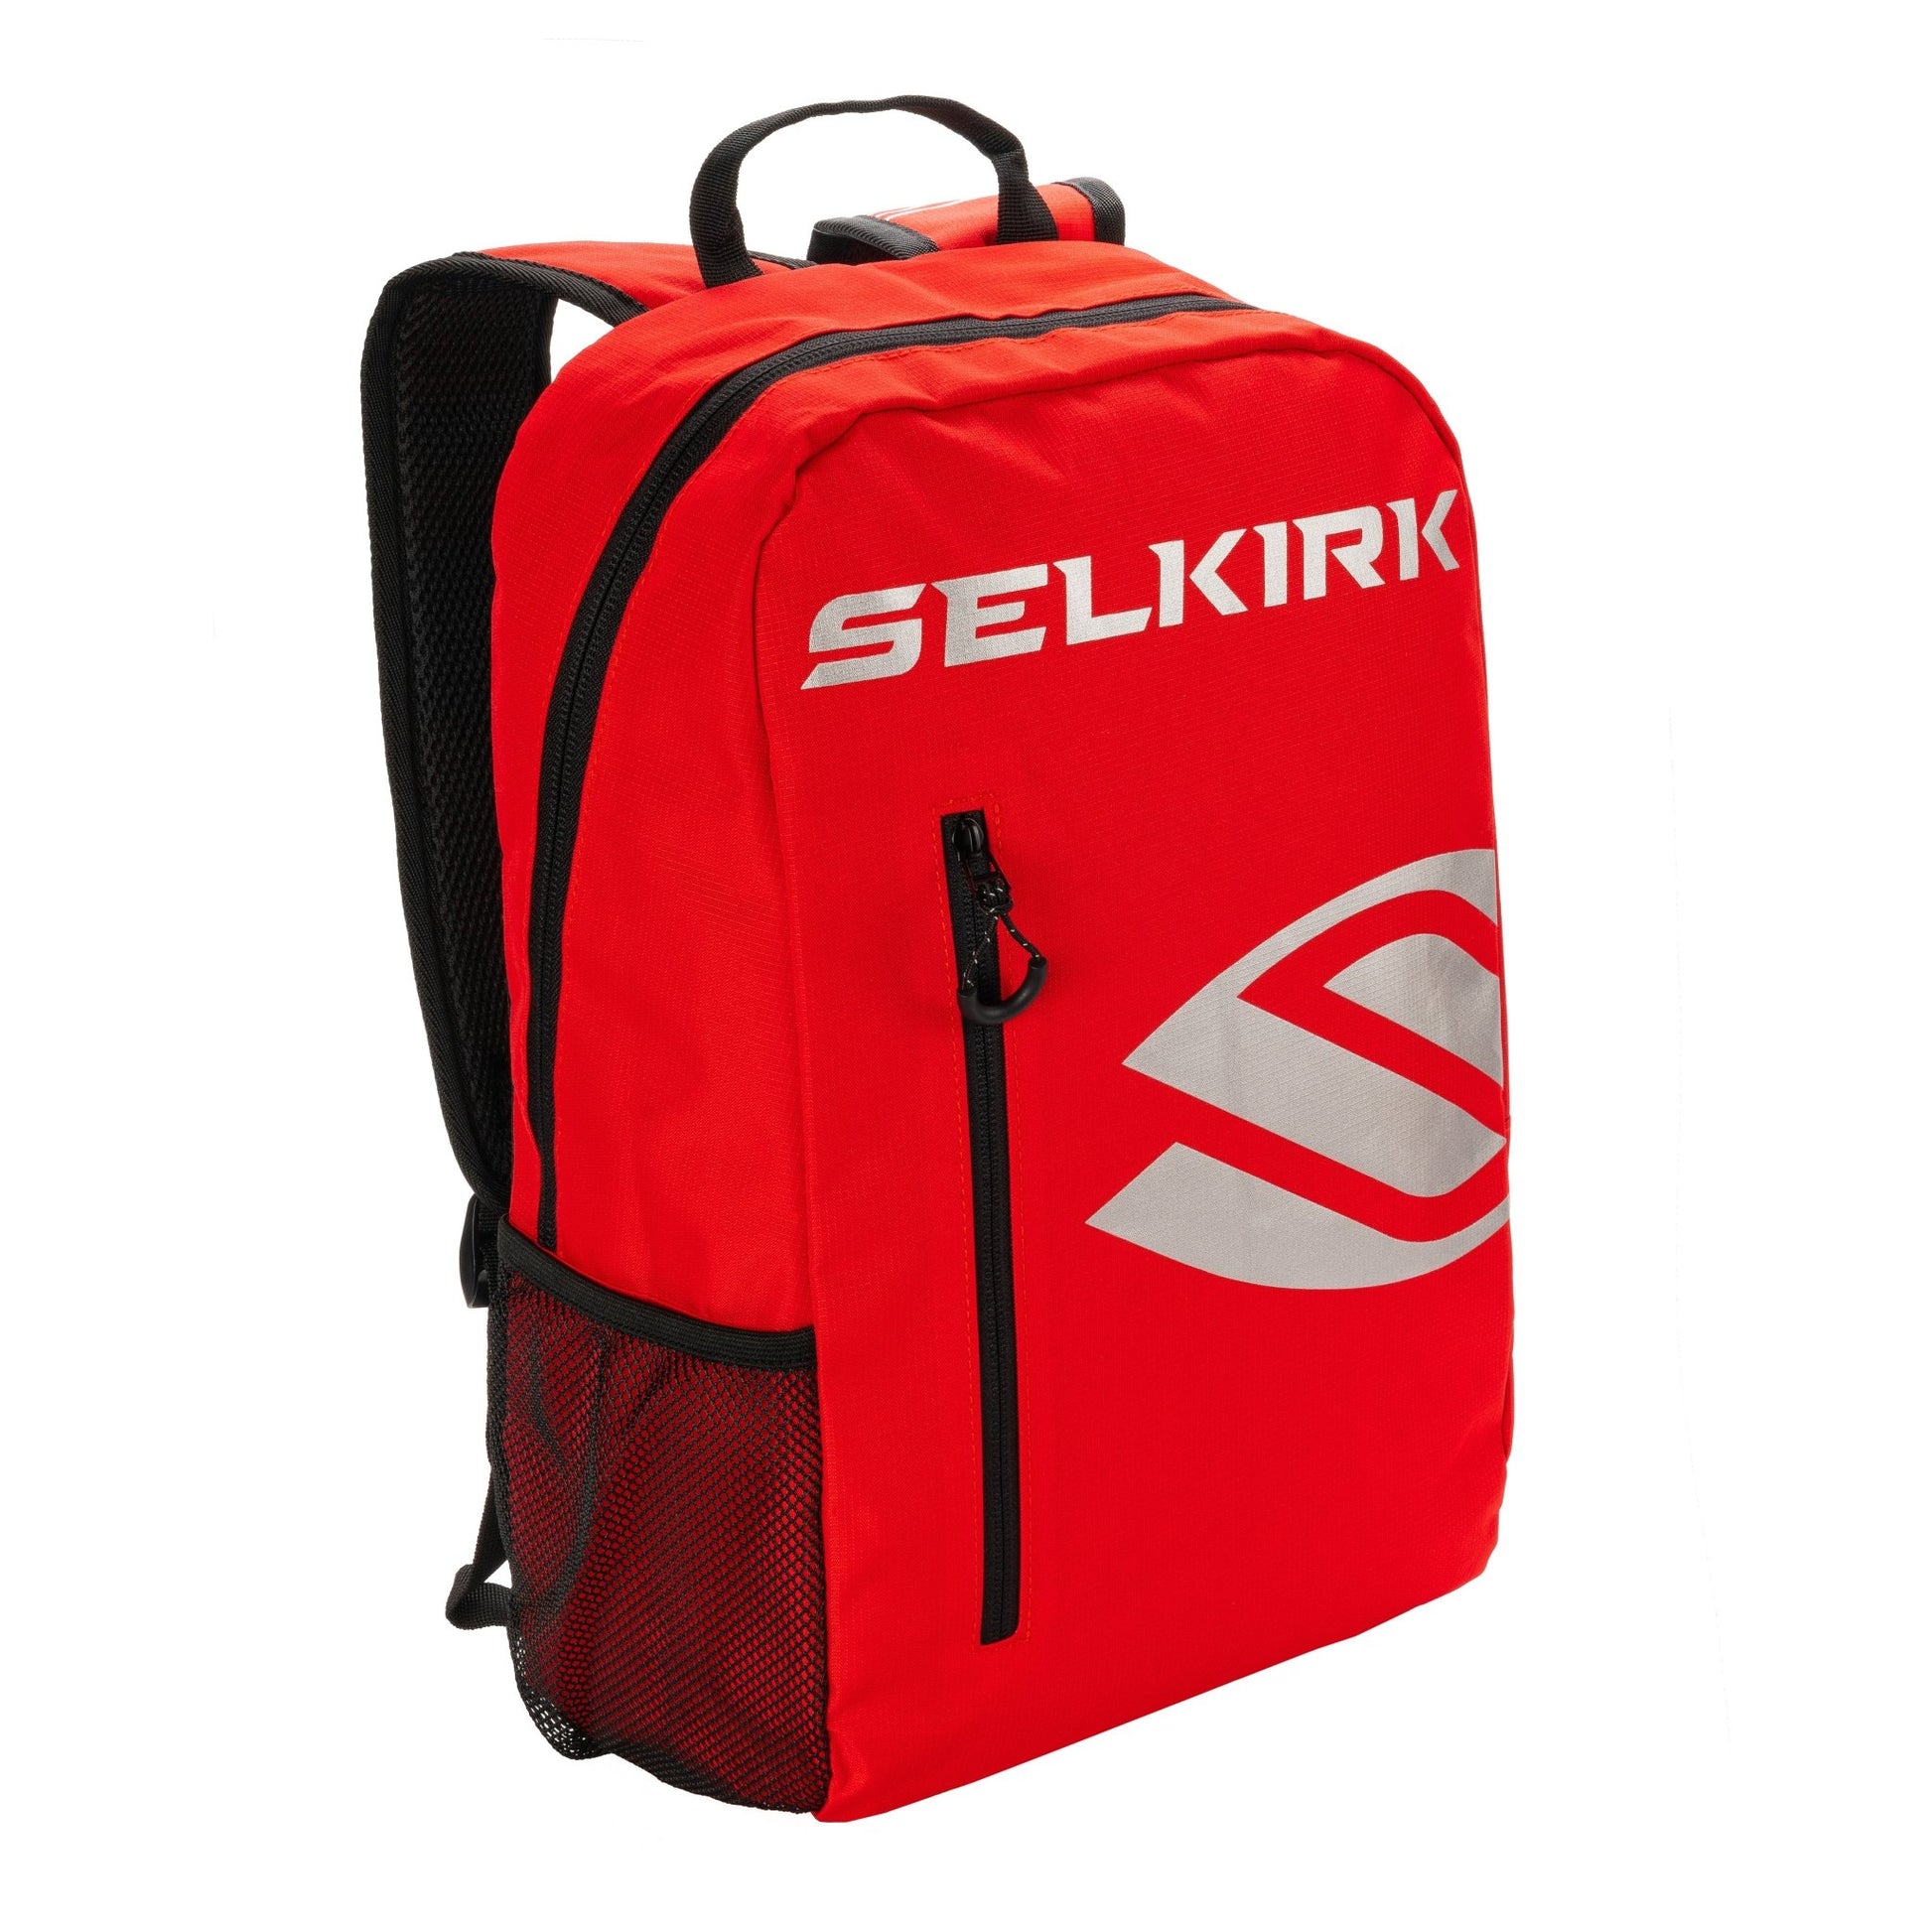 CORE SERIES DAY BACKPACK - Grip On Golf & Pickleball Zone